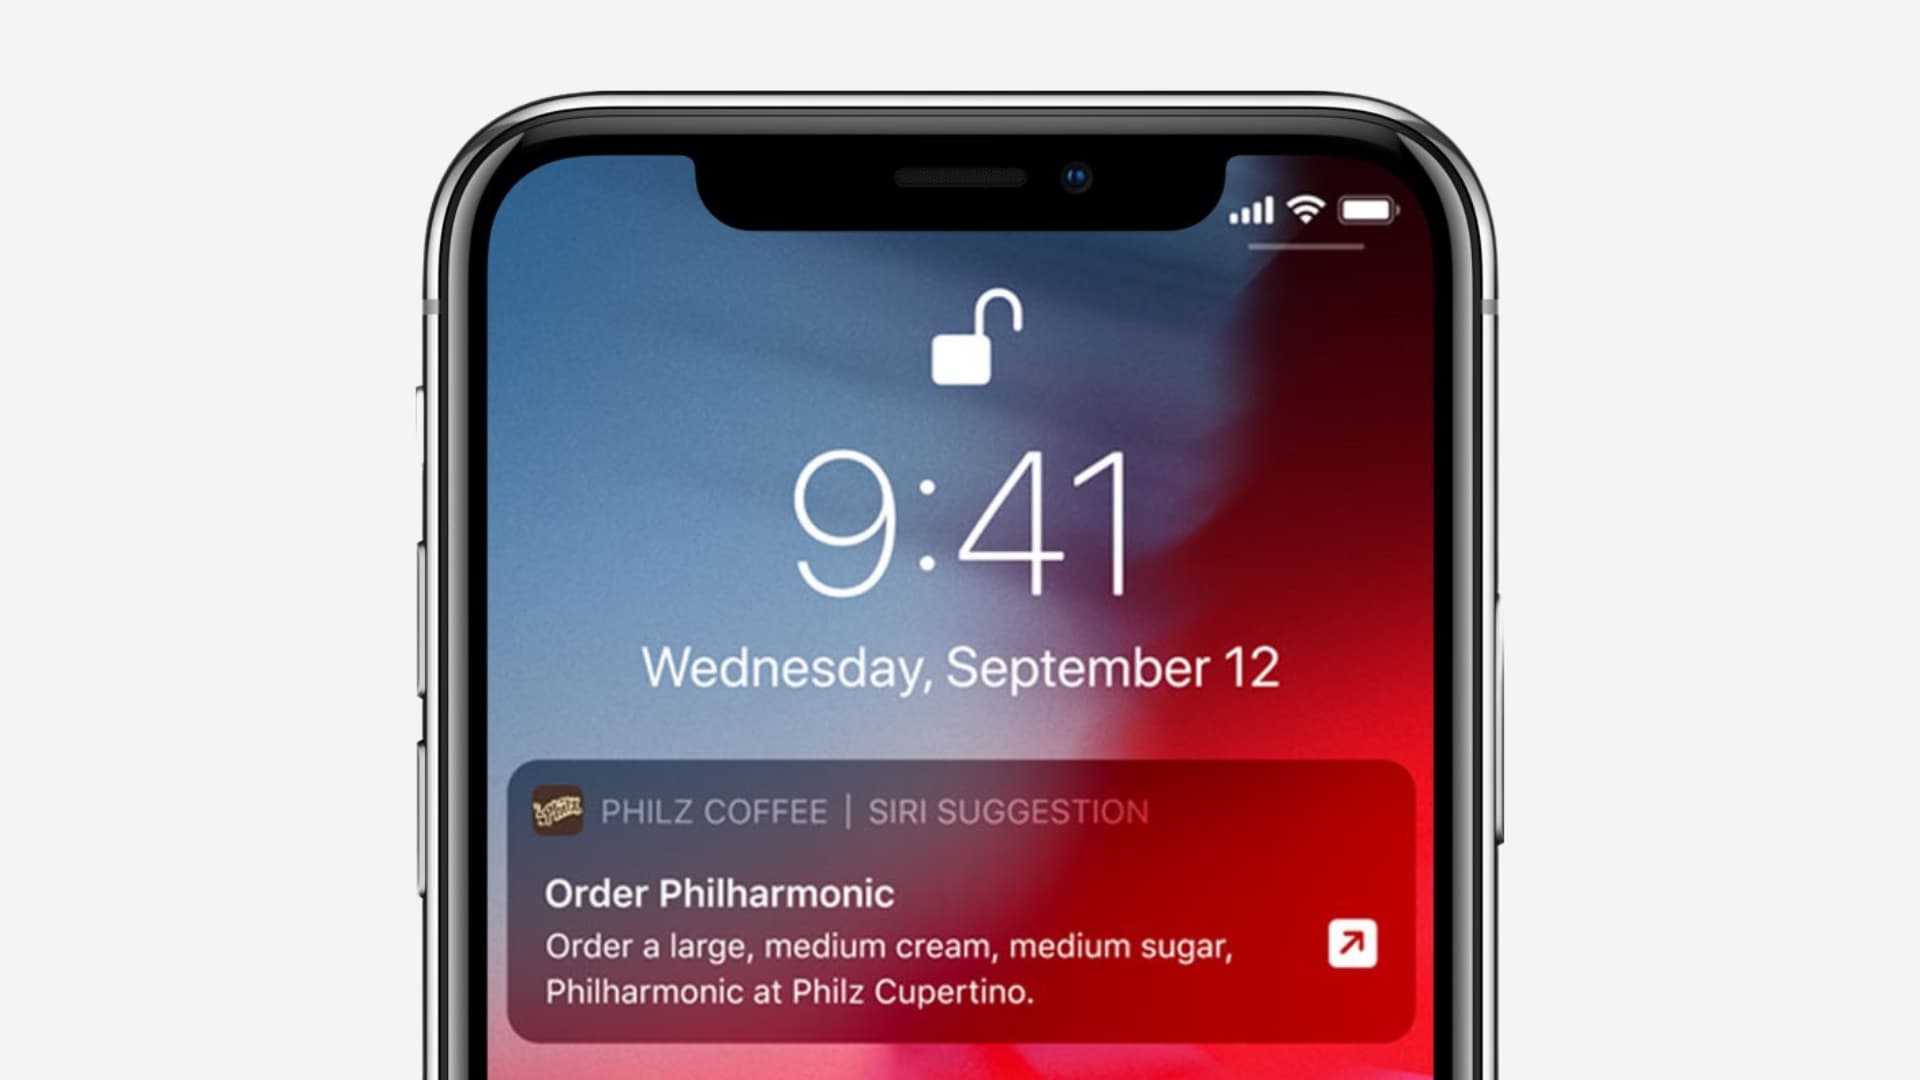 Siri suggestion for an app on iPhone Lock Screen